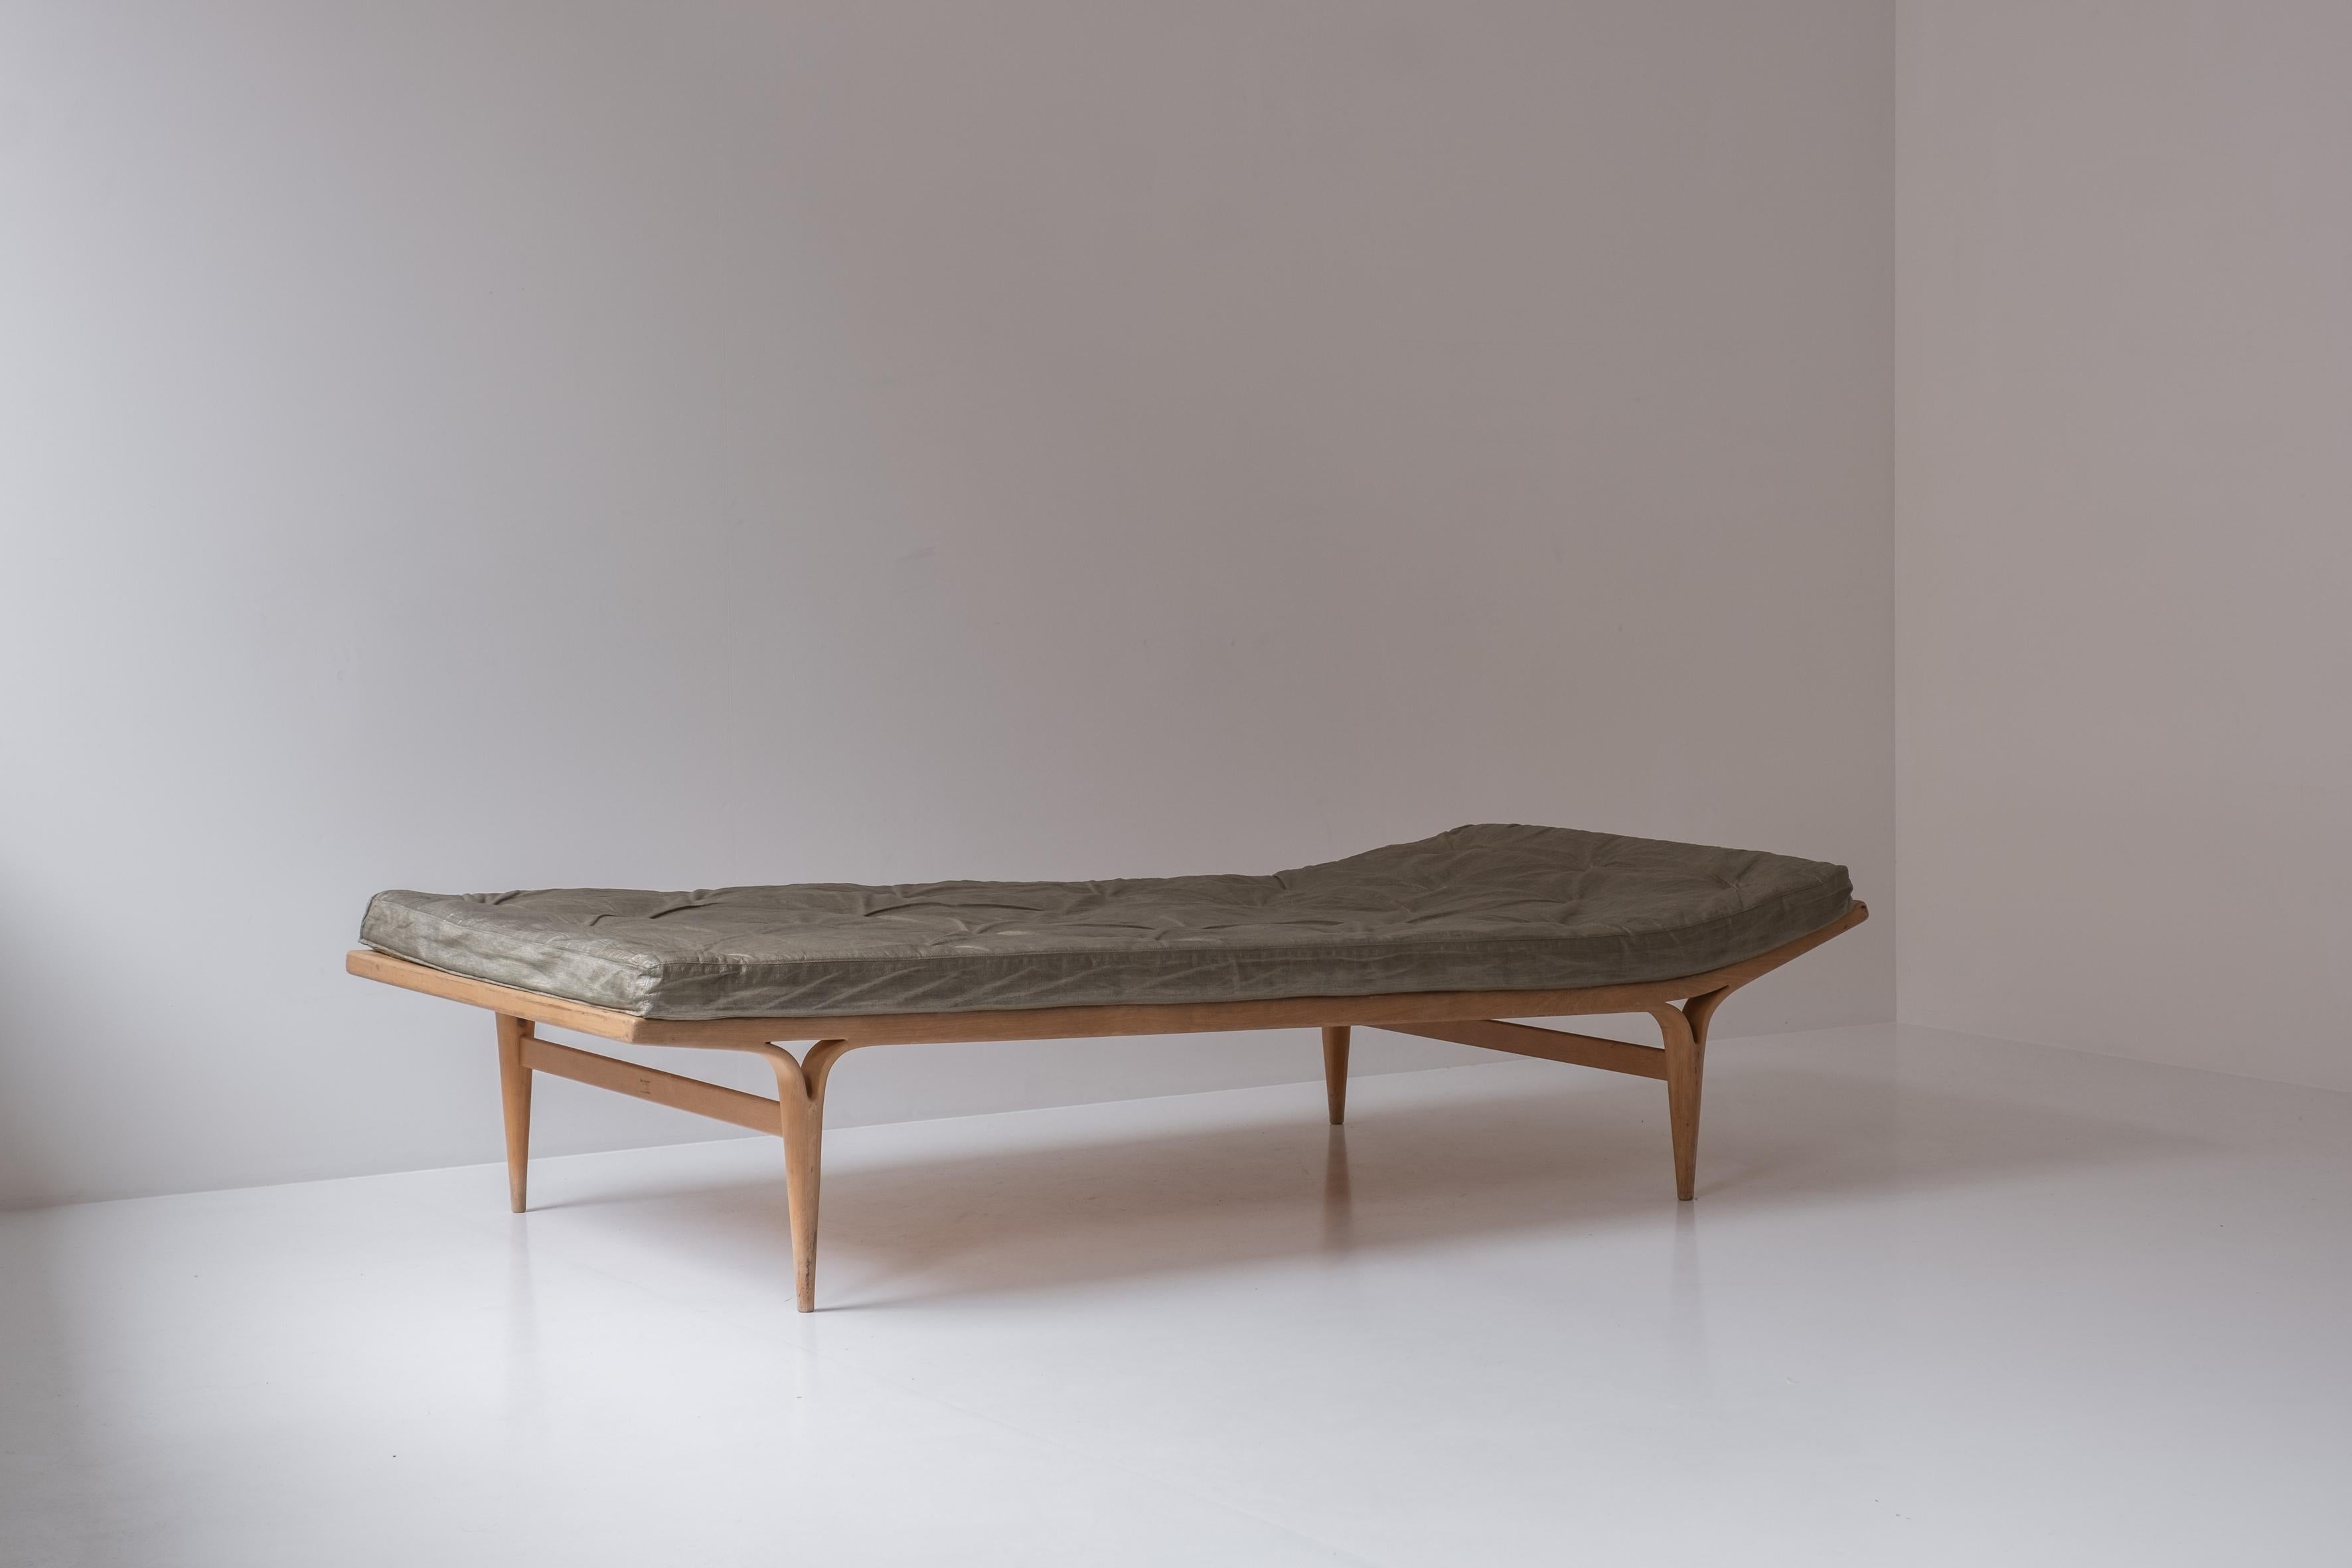 Rare ‘Berlin’ daybed designed by Bruno Mathsson for Firma Karl Mathsson, Sweden 1969. This first edition daybed has the original canvas upholstery with leather cognac buttons. The frame is made out of beech. This model was originally presented at